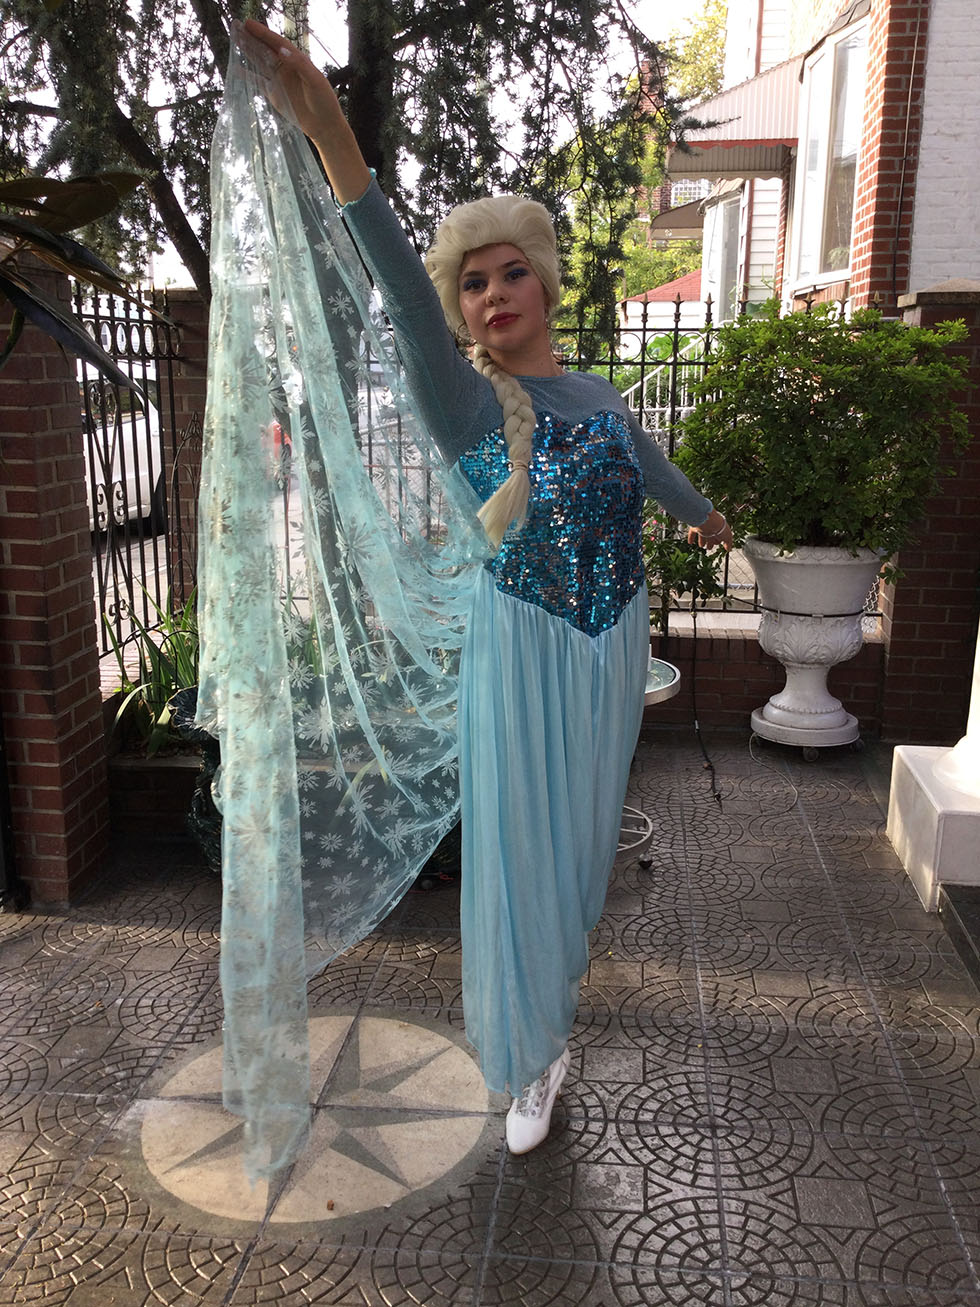 Snow and Ice Queen Elsa Frozen Party Character for kids parties and events in New York City, New York, New Jersey, Connecticut, Pennsylvania, and other states